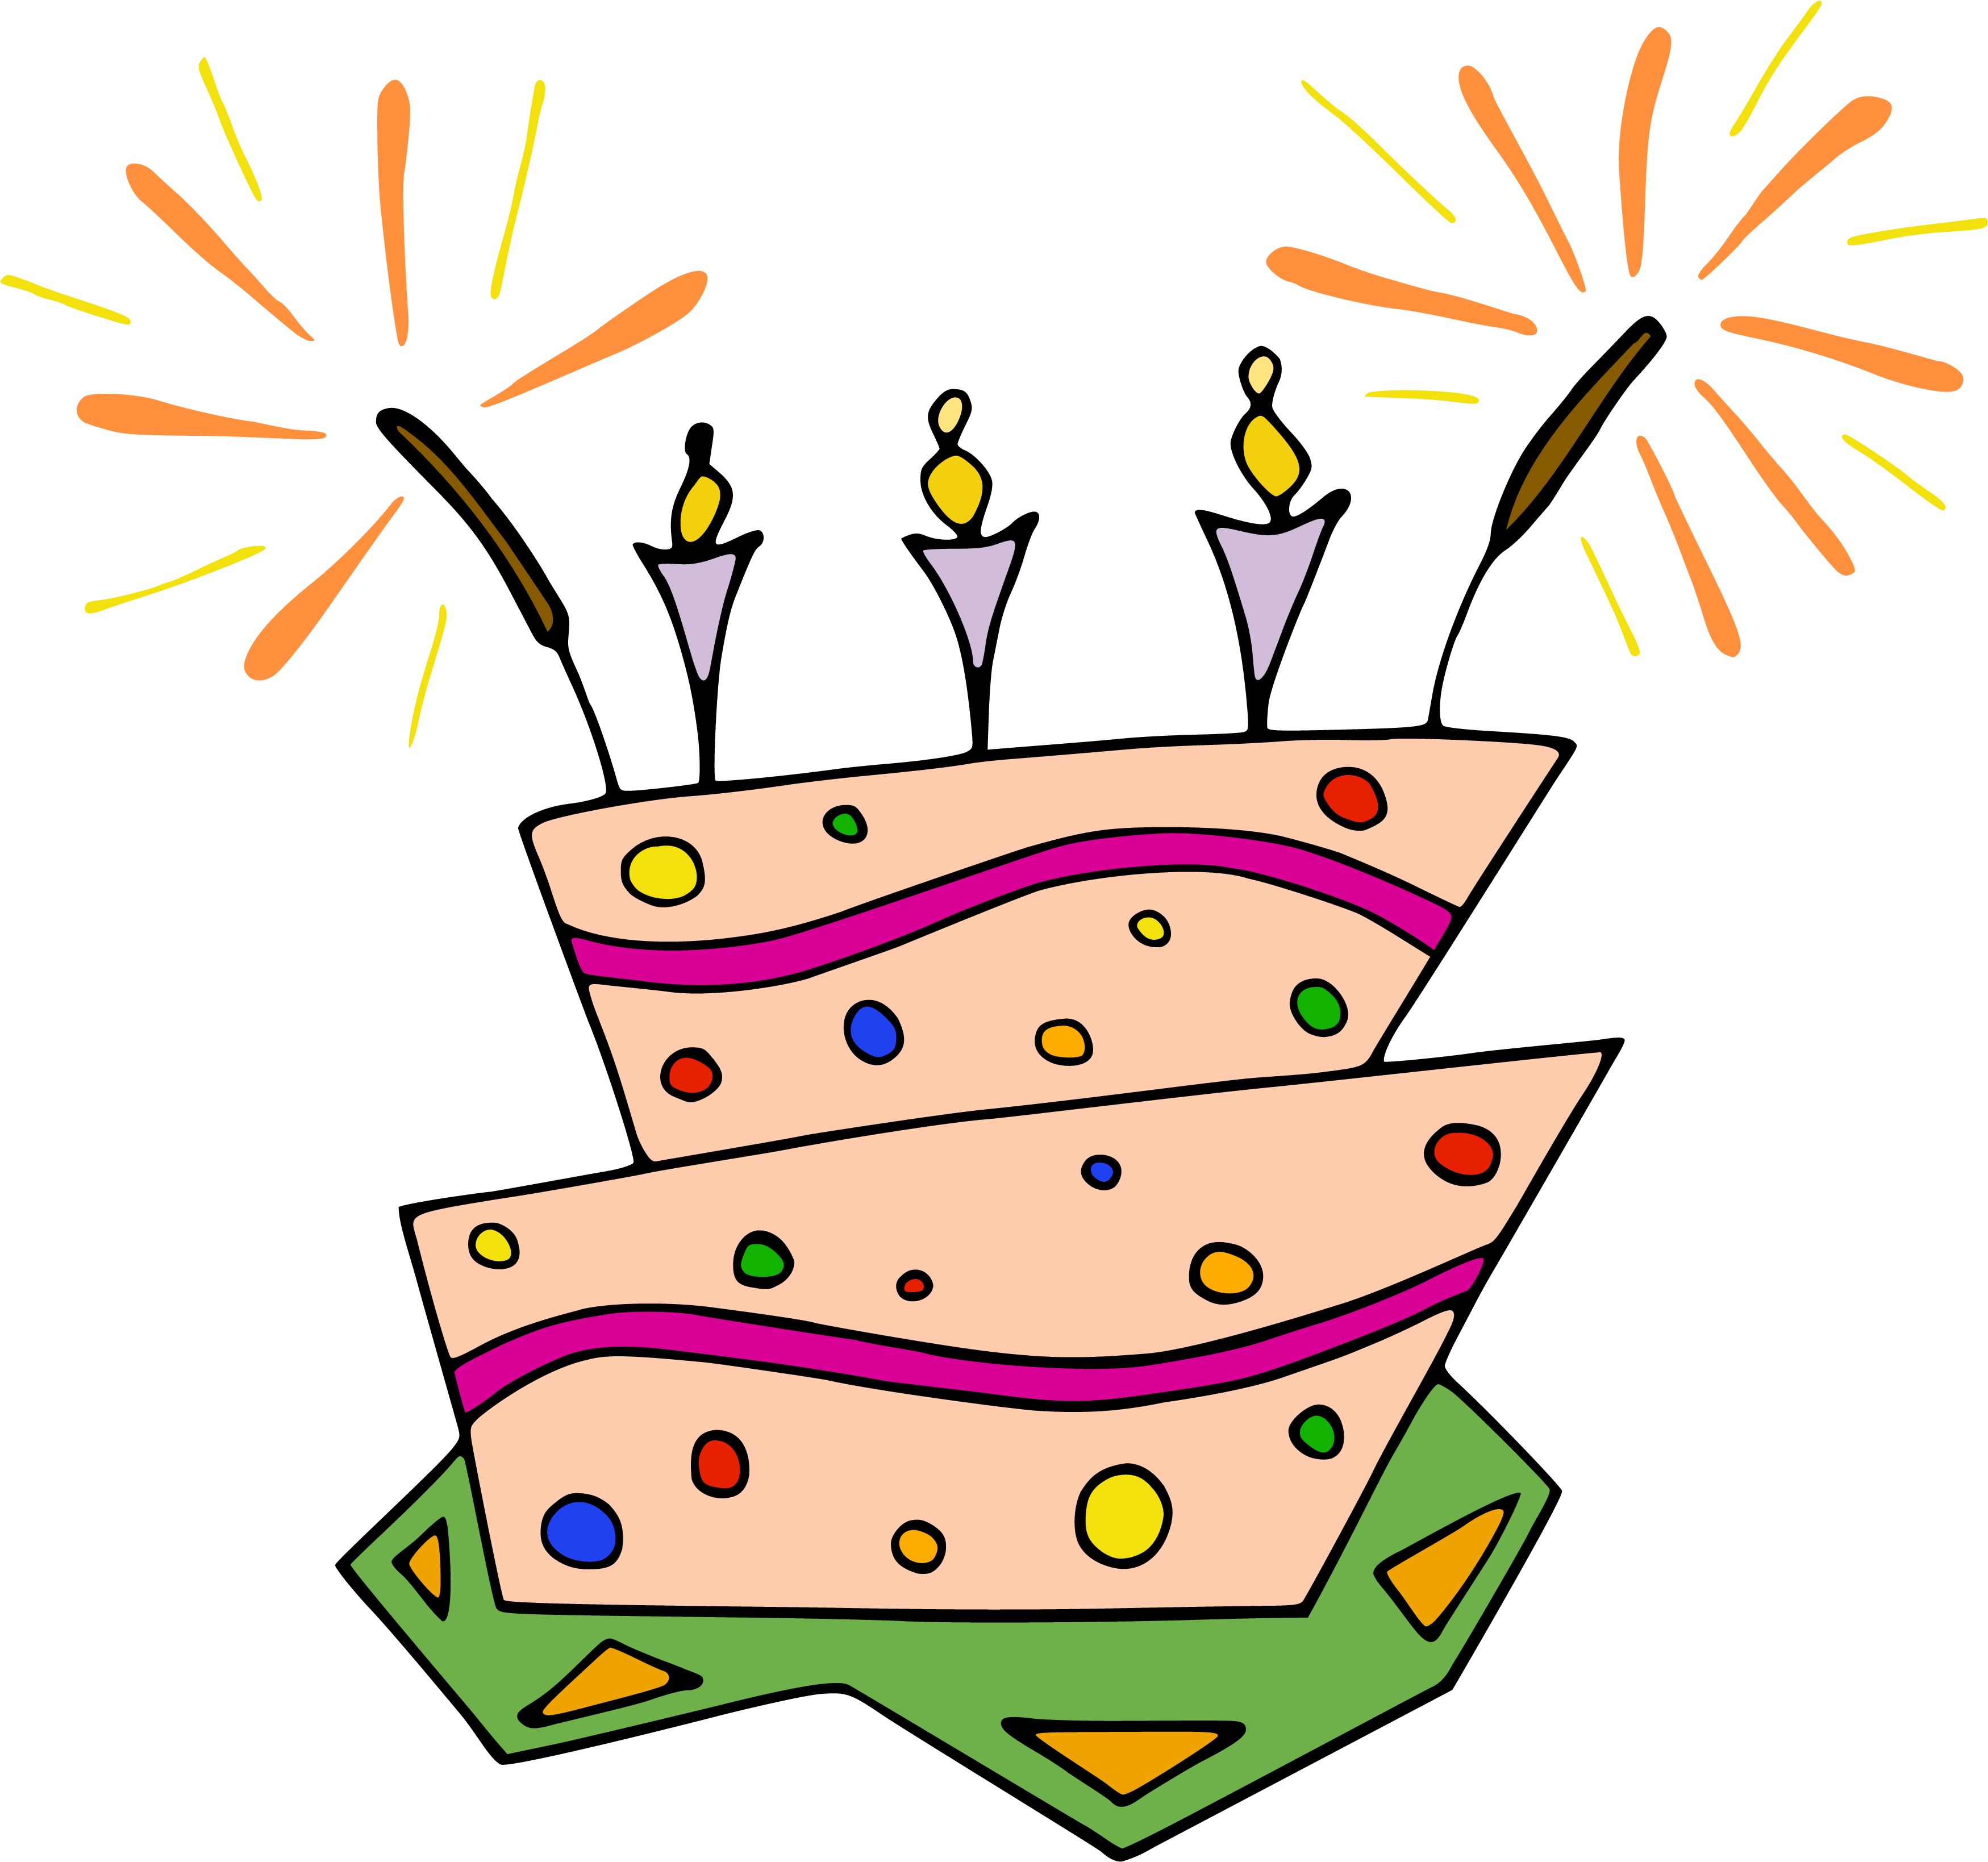 A Drawing Of A Cake With Fireworks